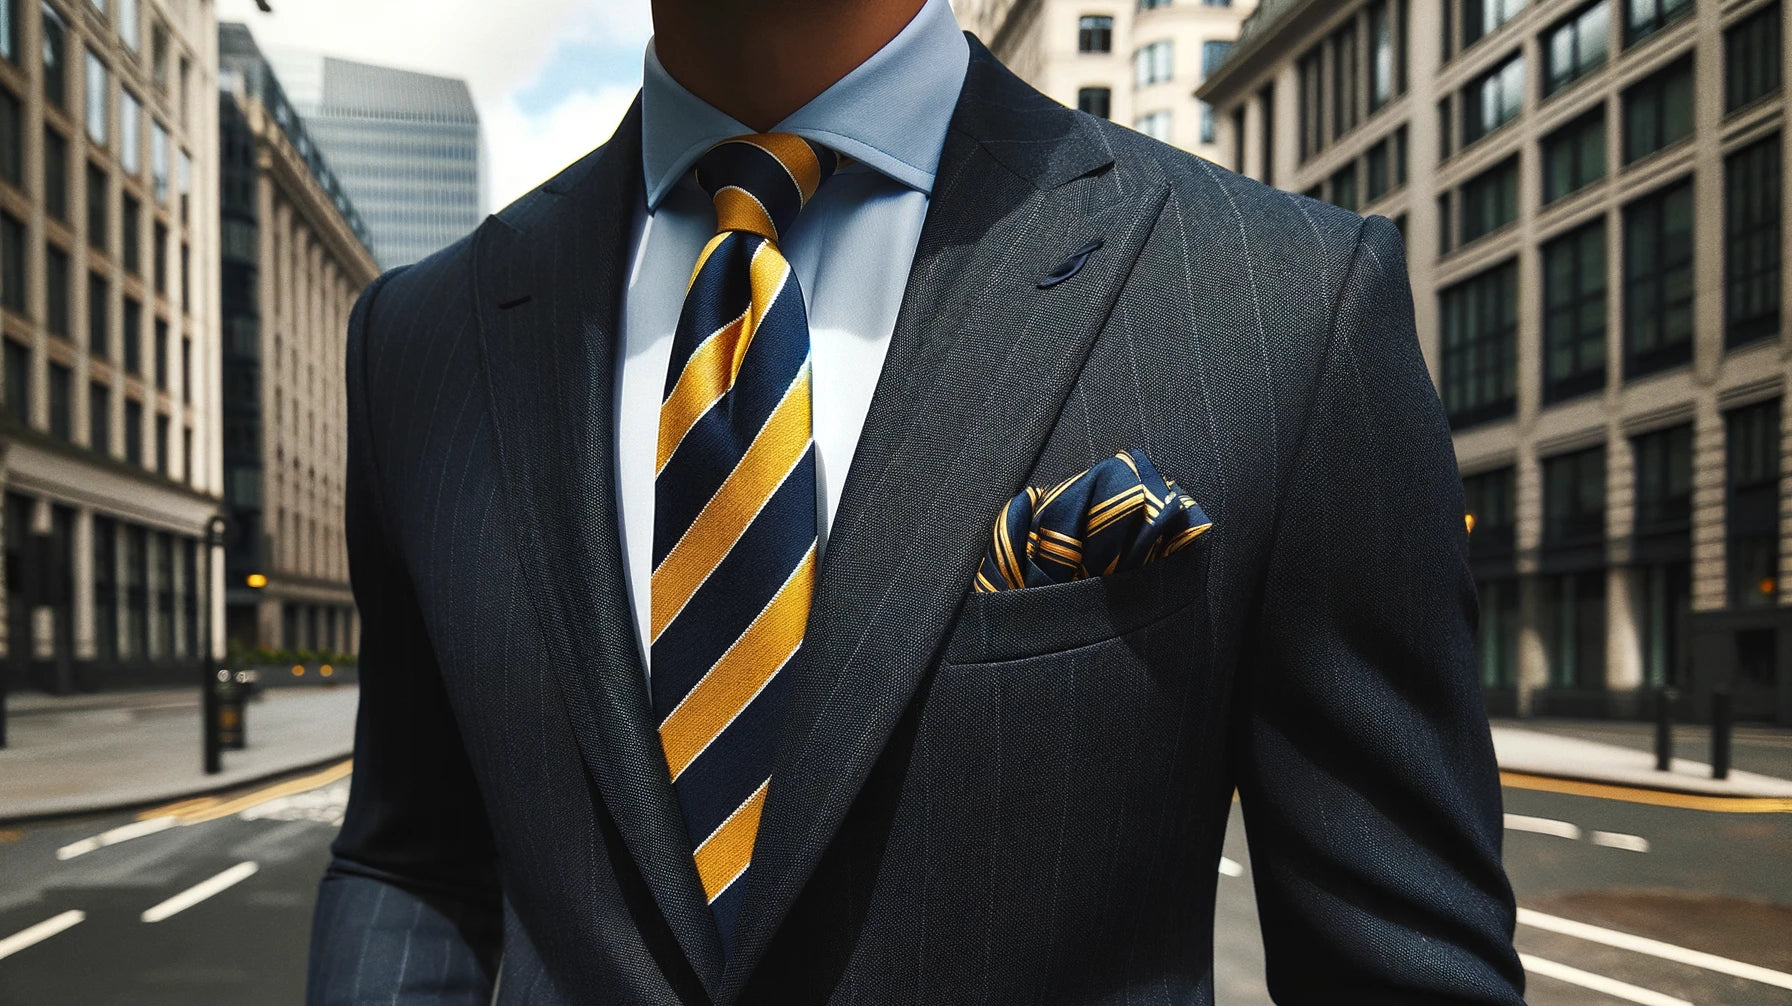 Golden yellow tie styled for a business casual outfit